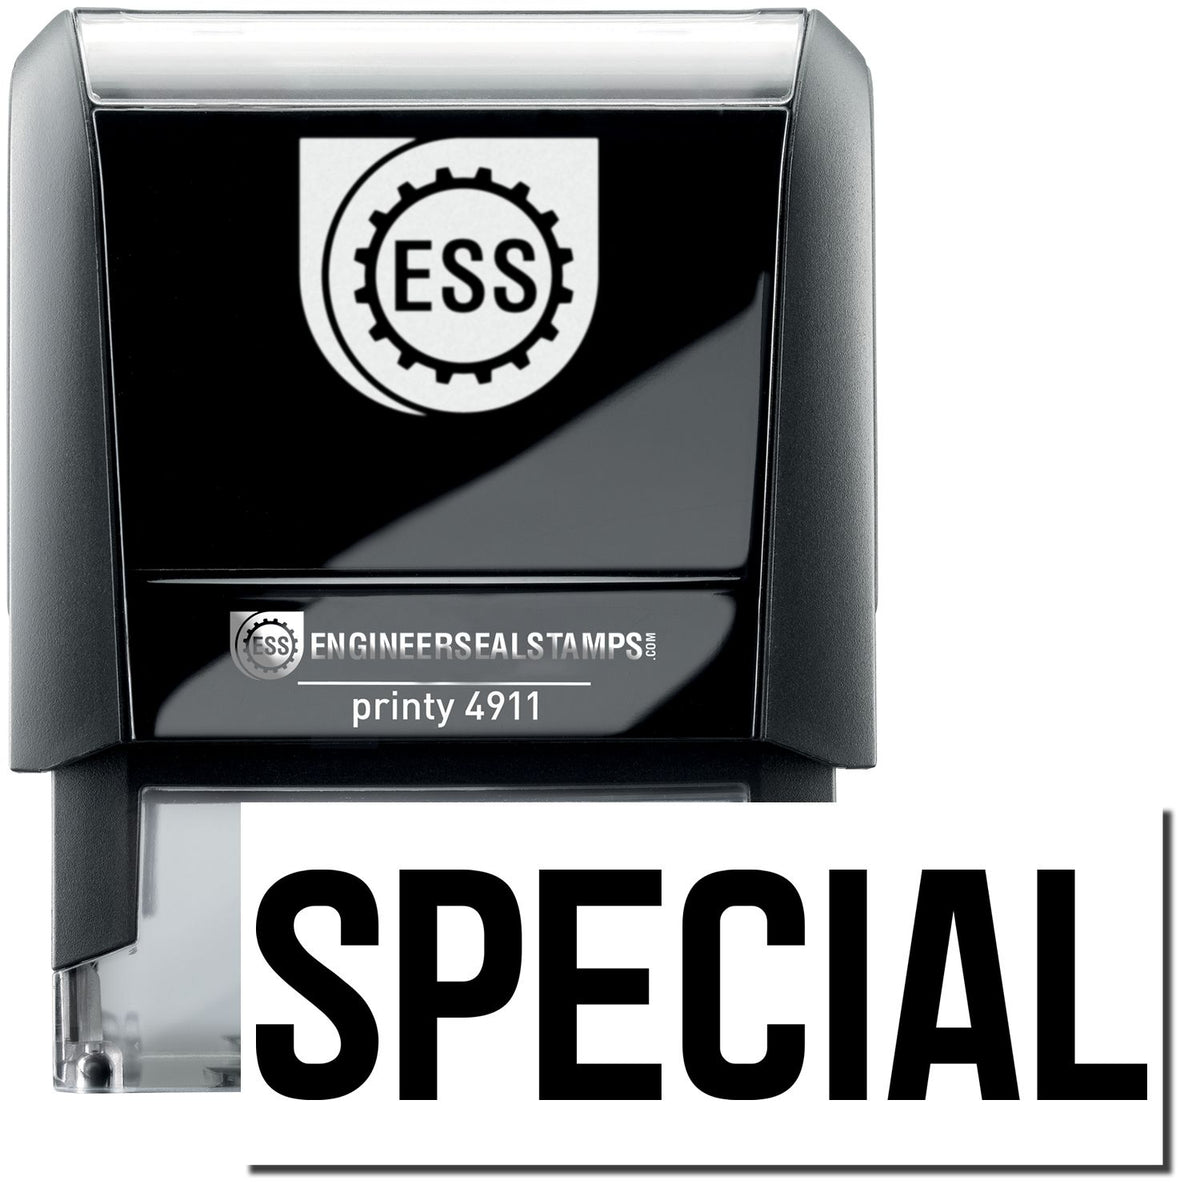 A self-inking stamp with a stamped image showing how the text &quot;SPECIAL&quot; is displayed after stamping.